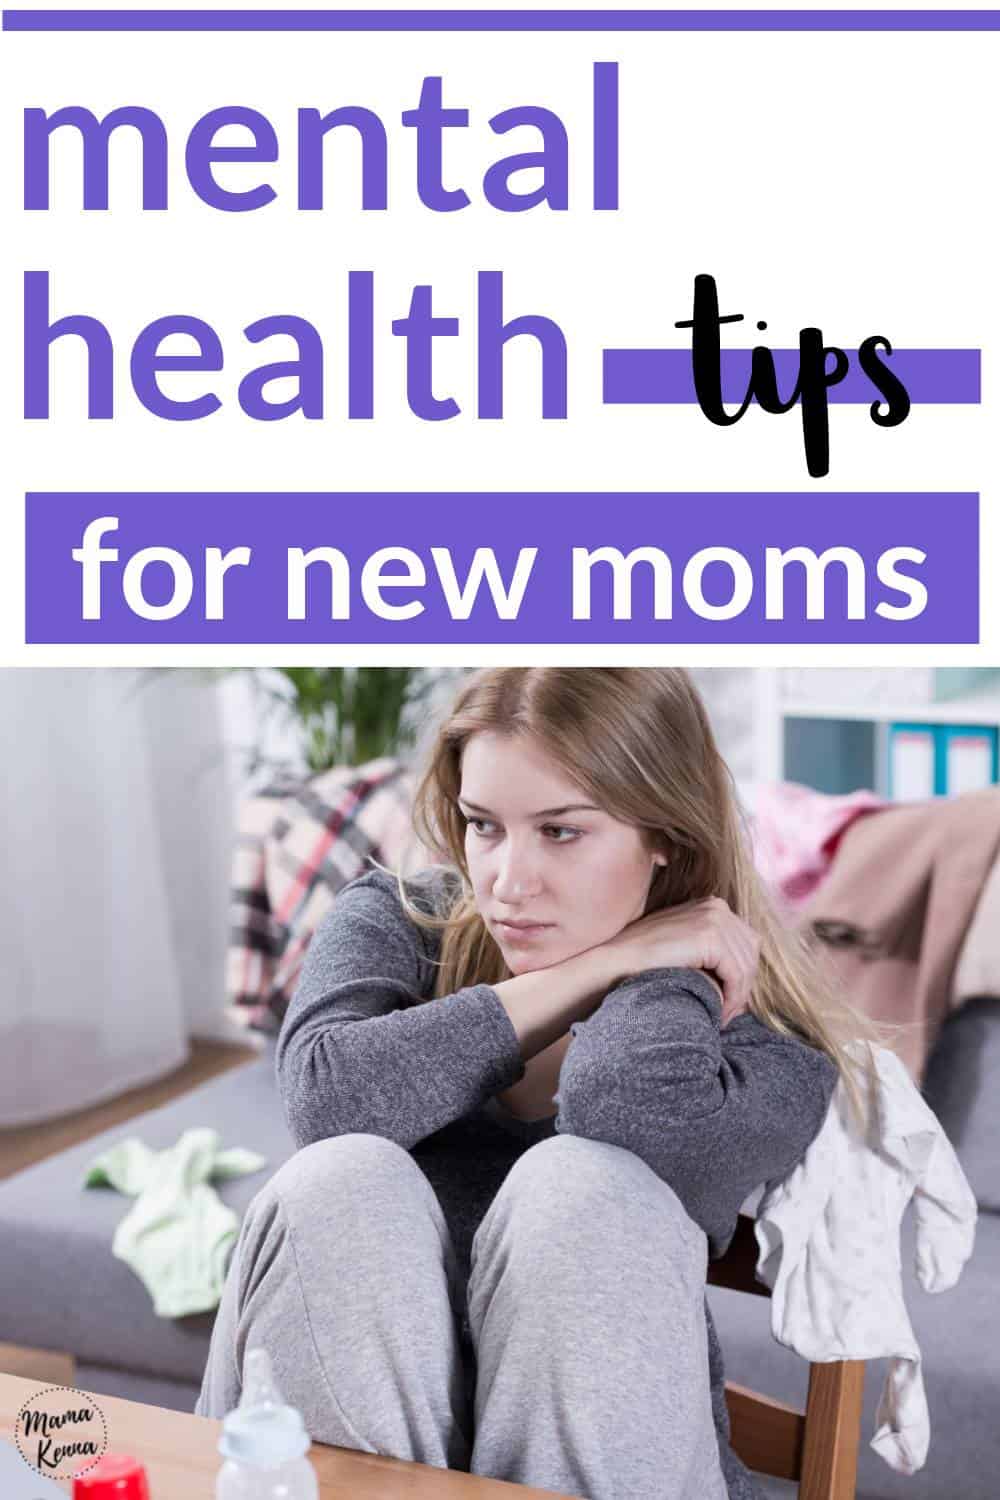 Your mental health is important. Here you can learn mental health tips for new moms that can help maintain your mental health.